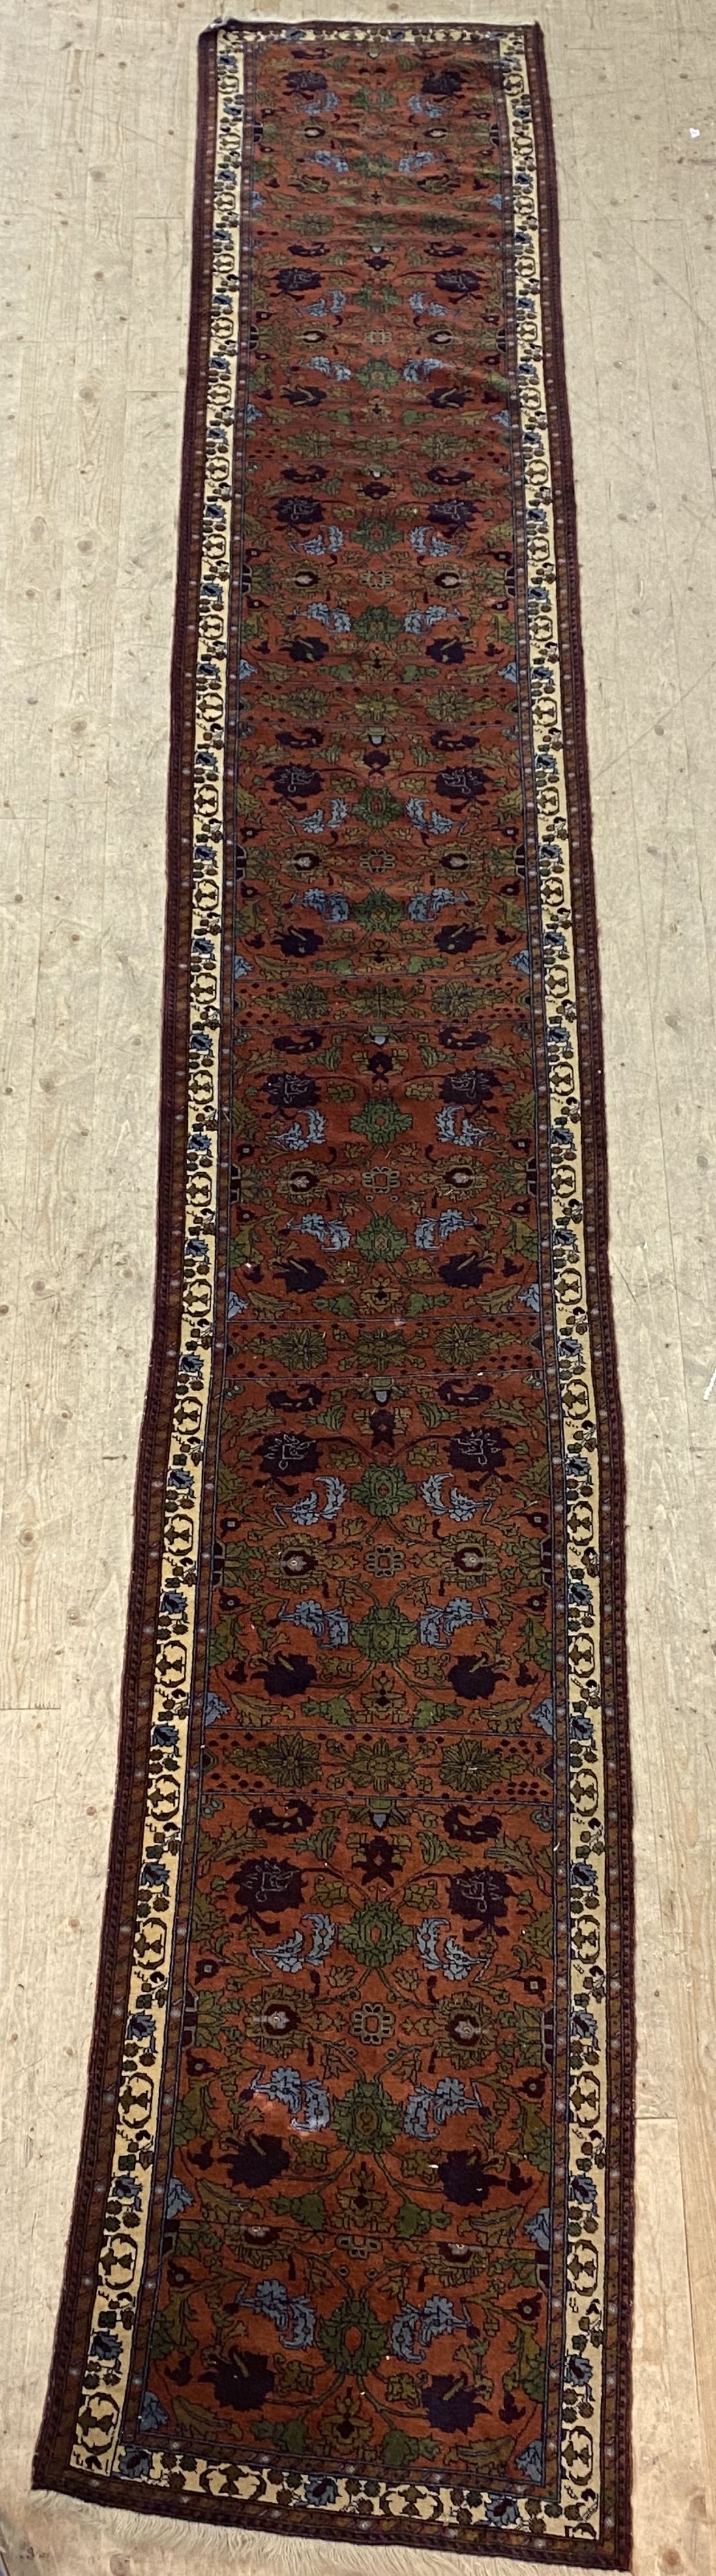 A Persian hand-knotted wool runner rug, mid-20th century, the dark red field having seven panels